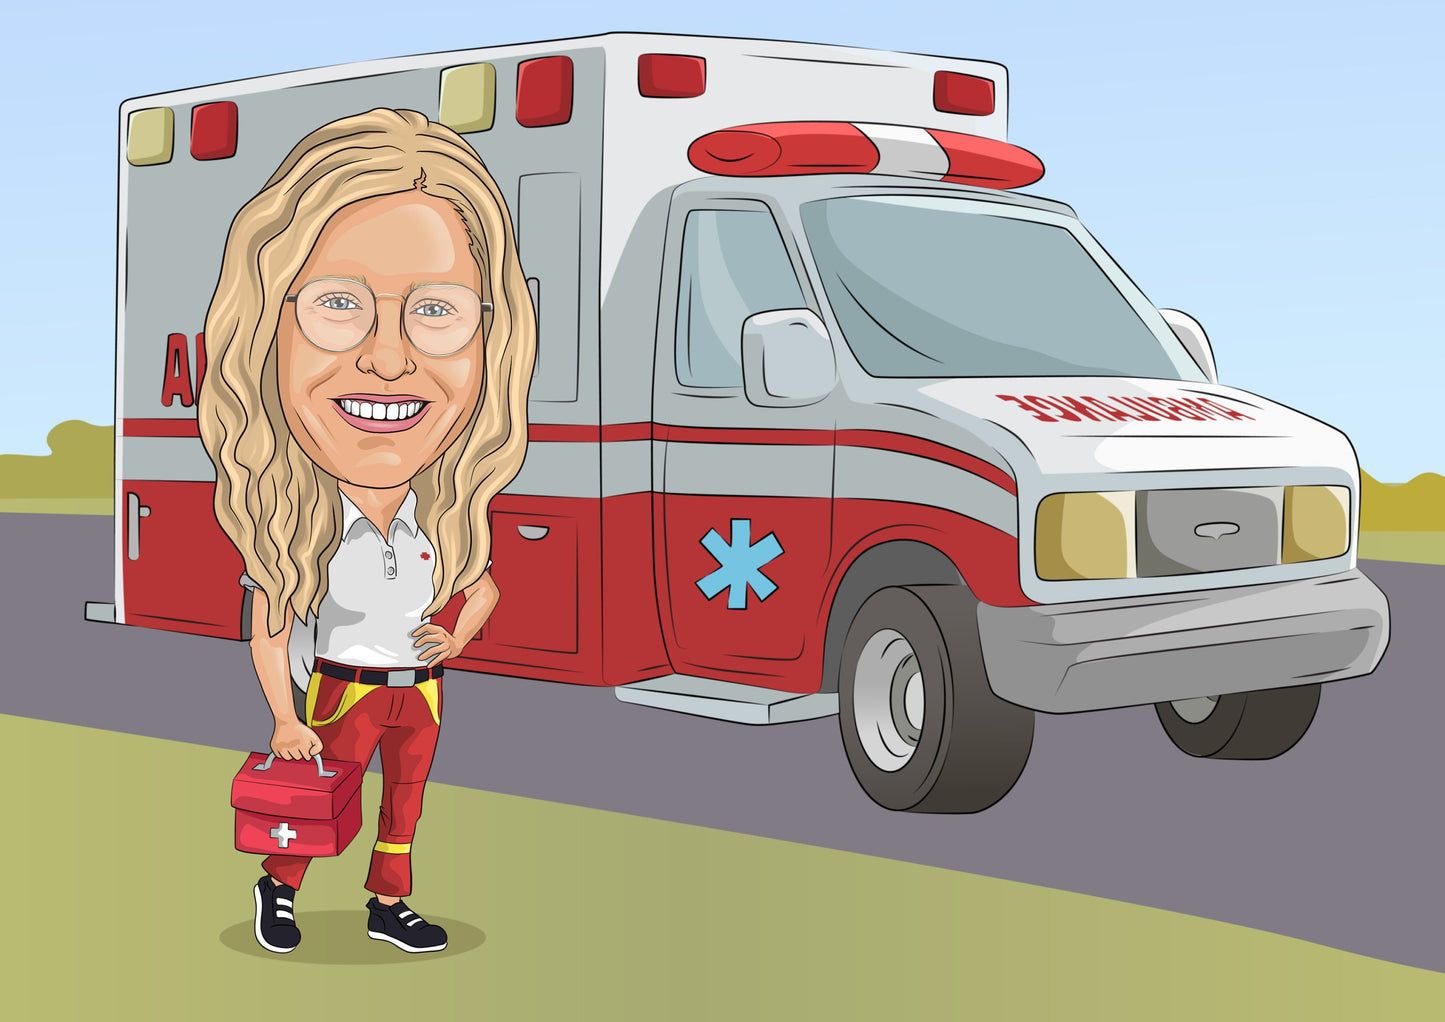 Emergency medical technician Gift - Custom Caricature From Photo, EMT gifts, First Responder gift